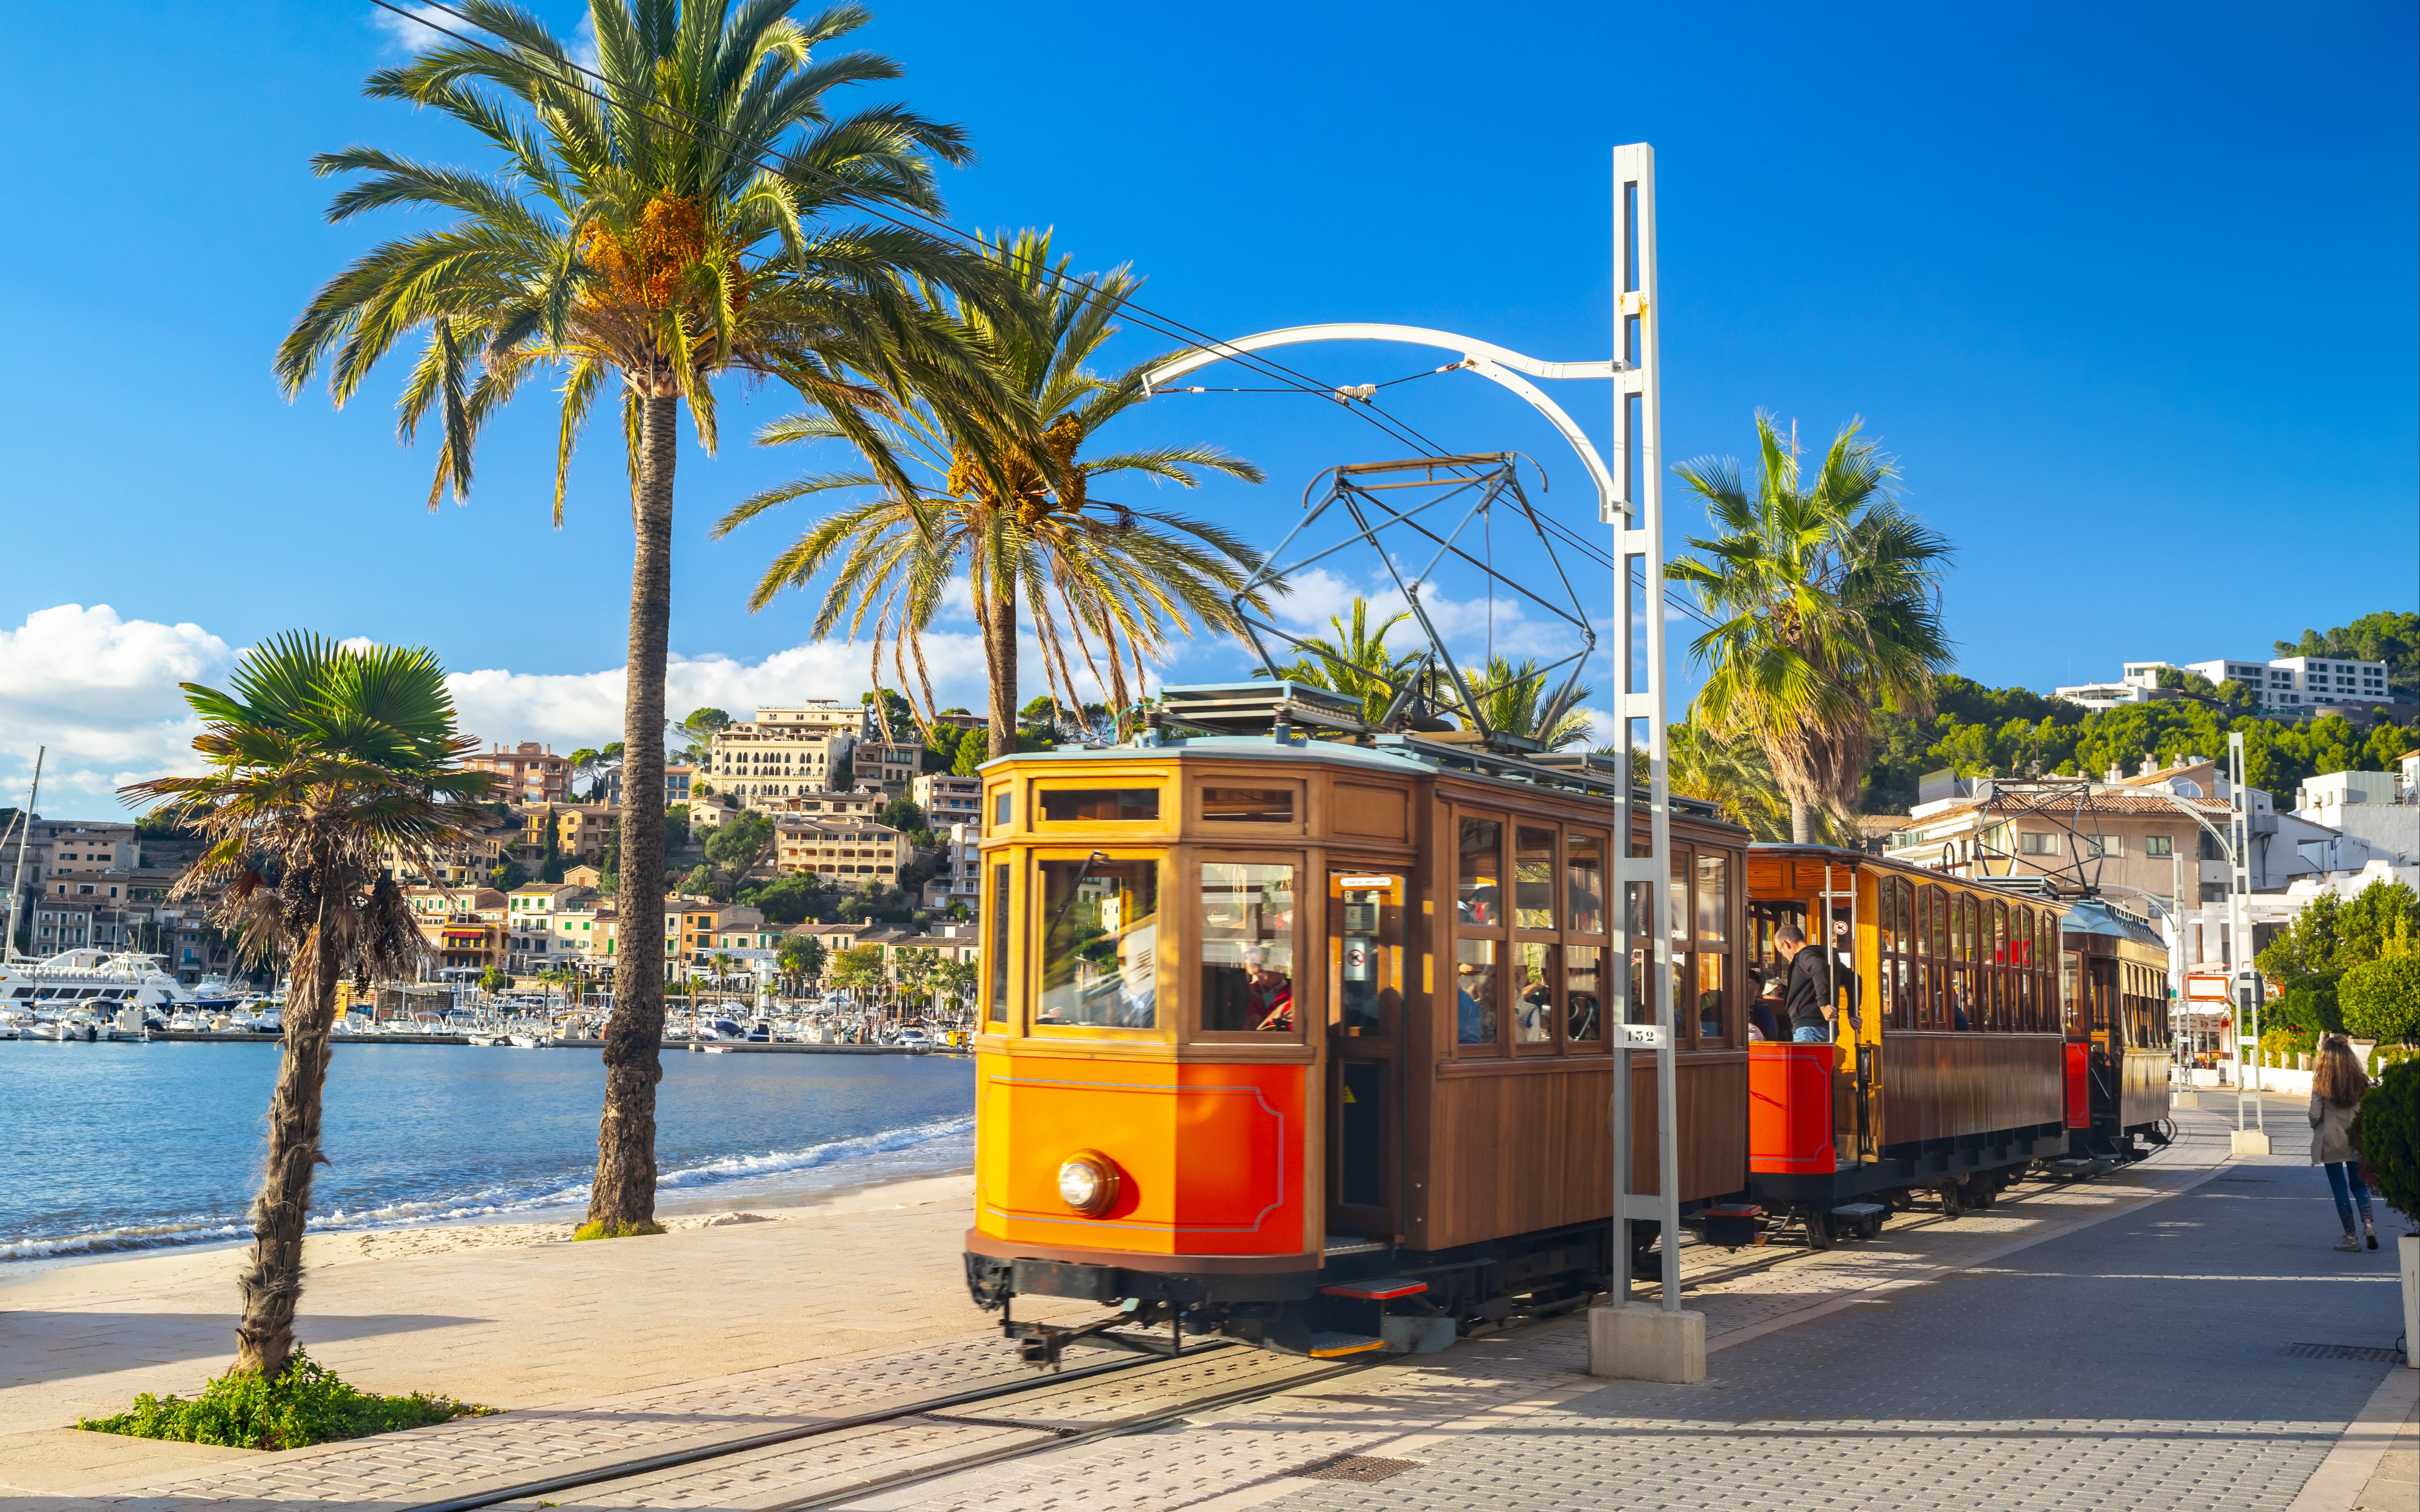 An image of the vintage orange tram in Mallorca